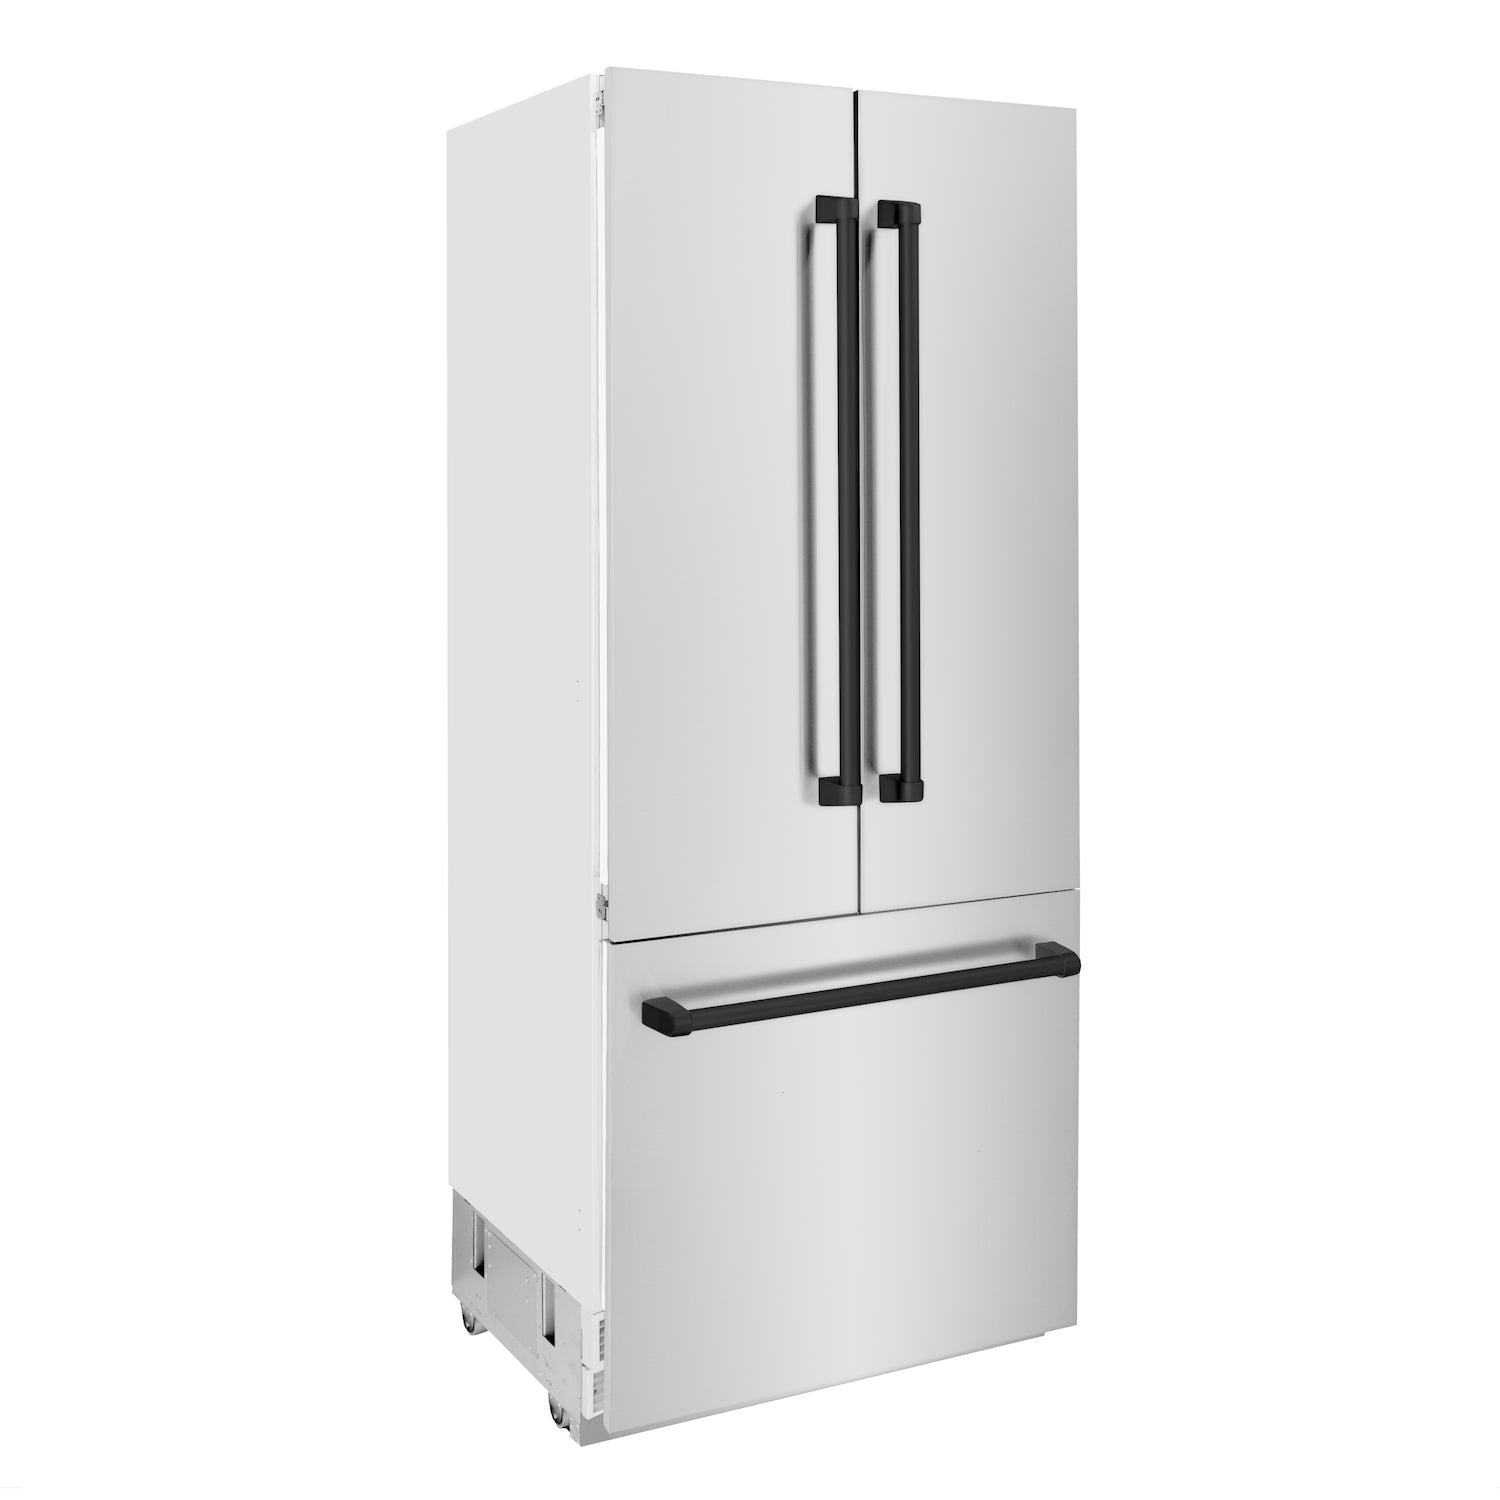 ZLINE 36" Autograph Edition Built-in 2-Door Bottom Freezer Refrigerator - Stainless Steel with Internal Water and Ice Dispenser, Matte Black Accents